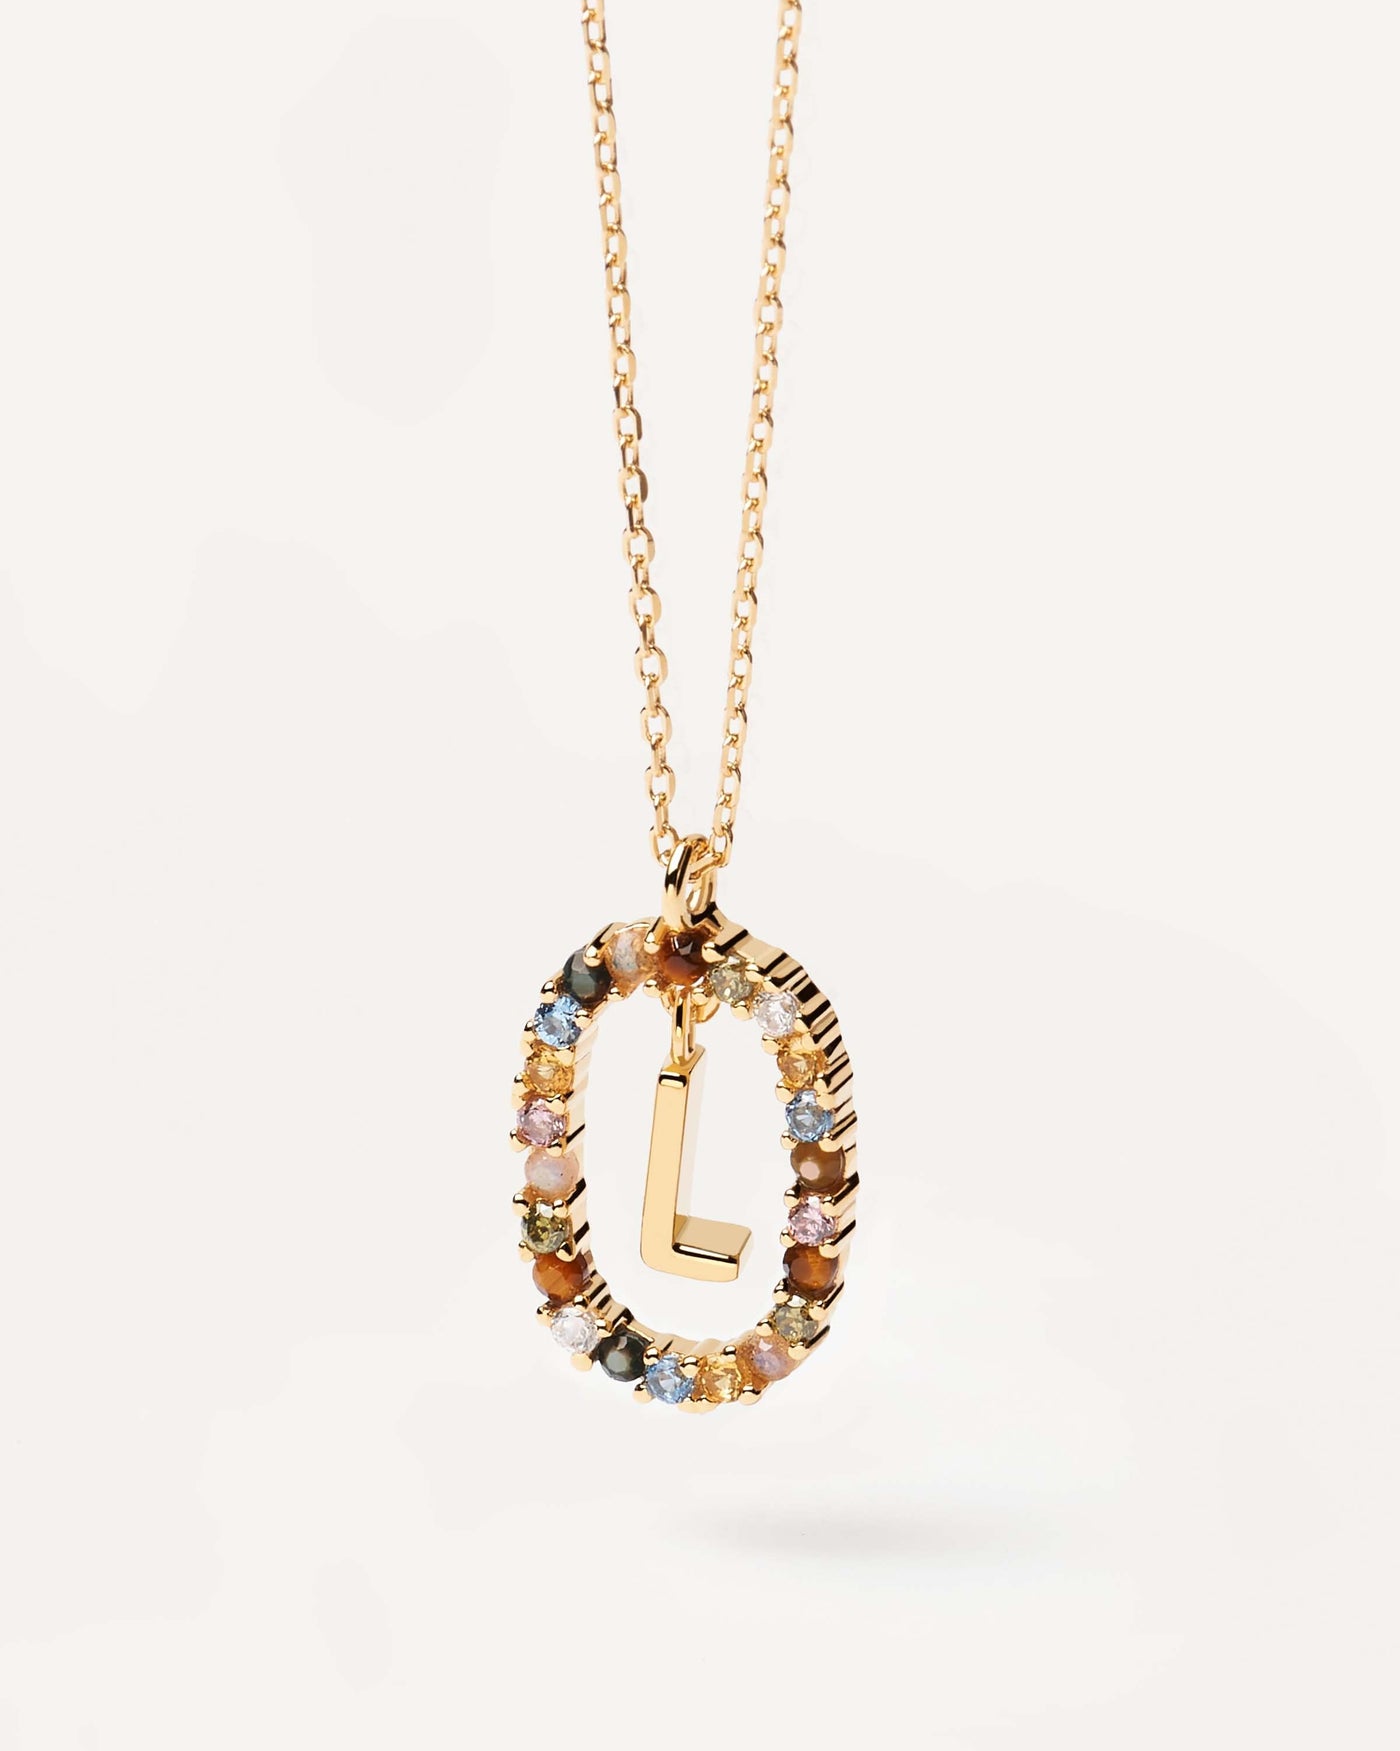 2023 Selection | Letter L necklace. Initial L necklace in gold-plated silver, circled by colorful gemstones. Get the latest arrival from PDPAOLA. Place your order safely and get this Best Seller. Free Shipping.